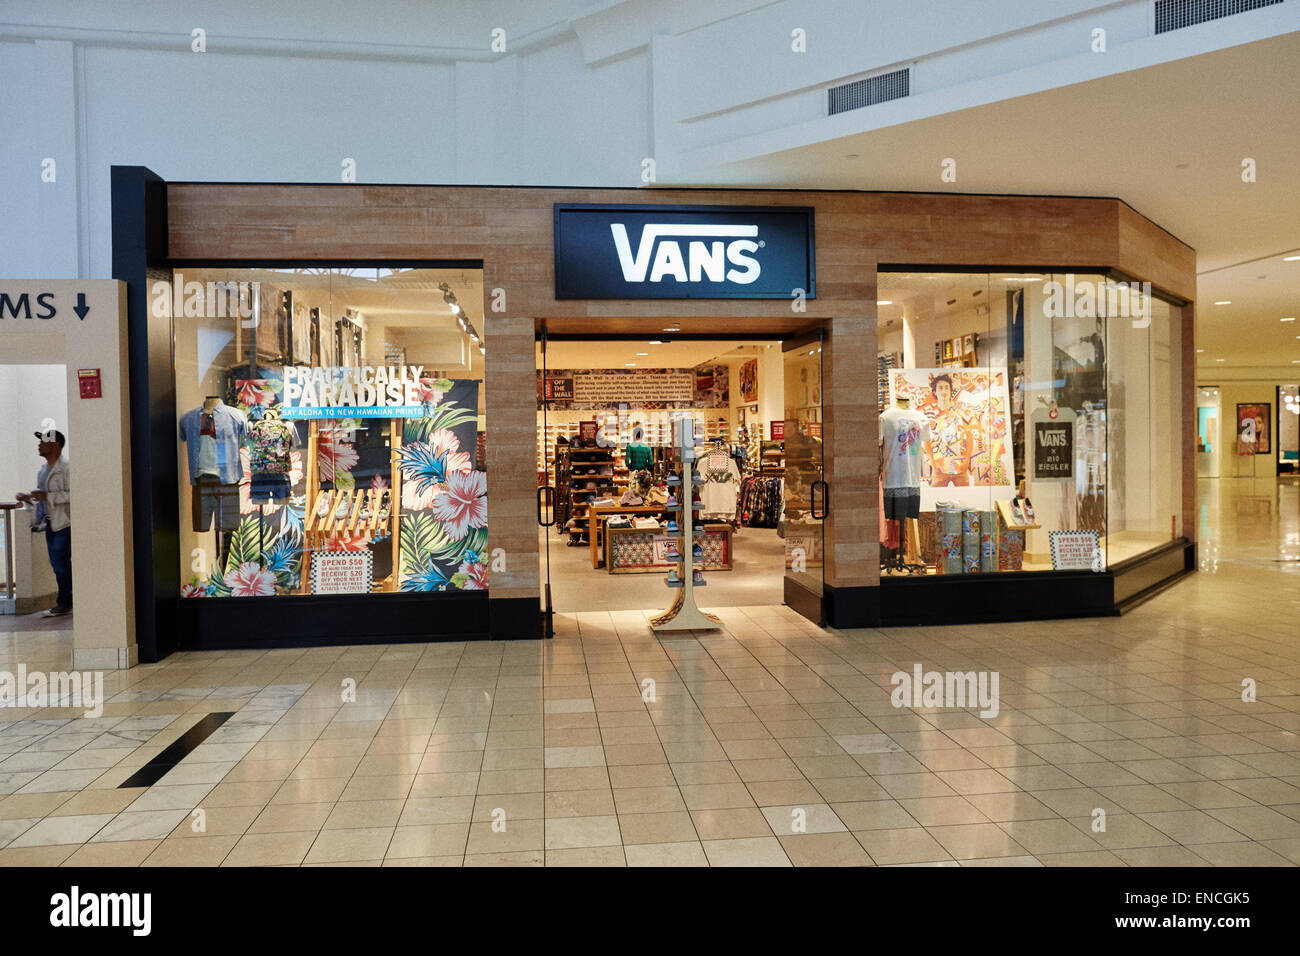 vans store in southlake mall